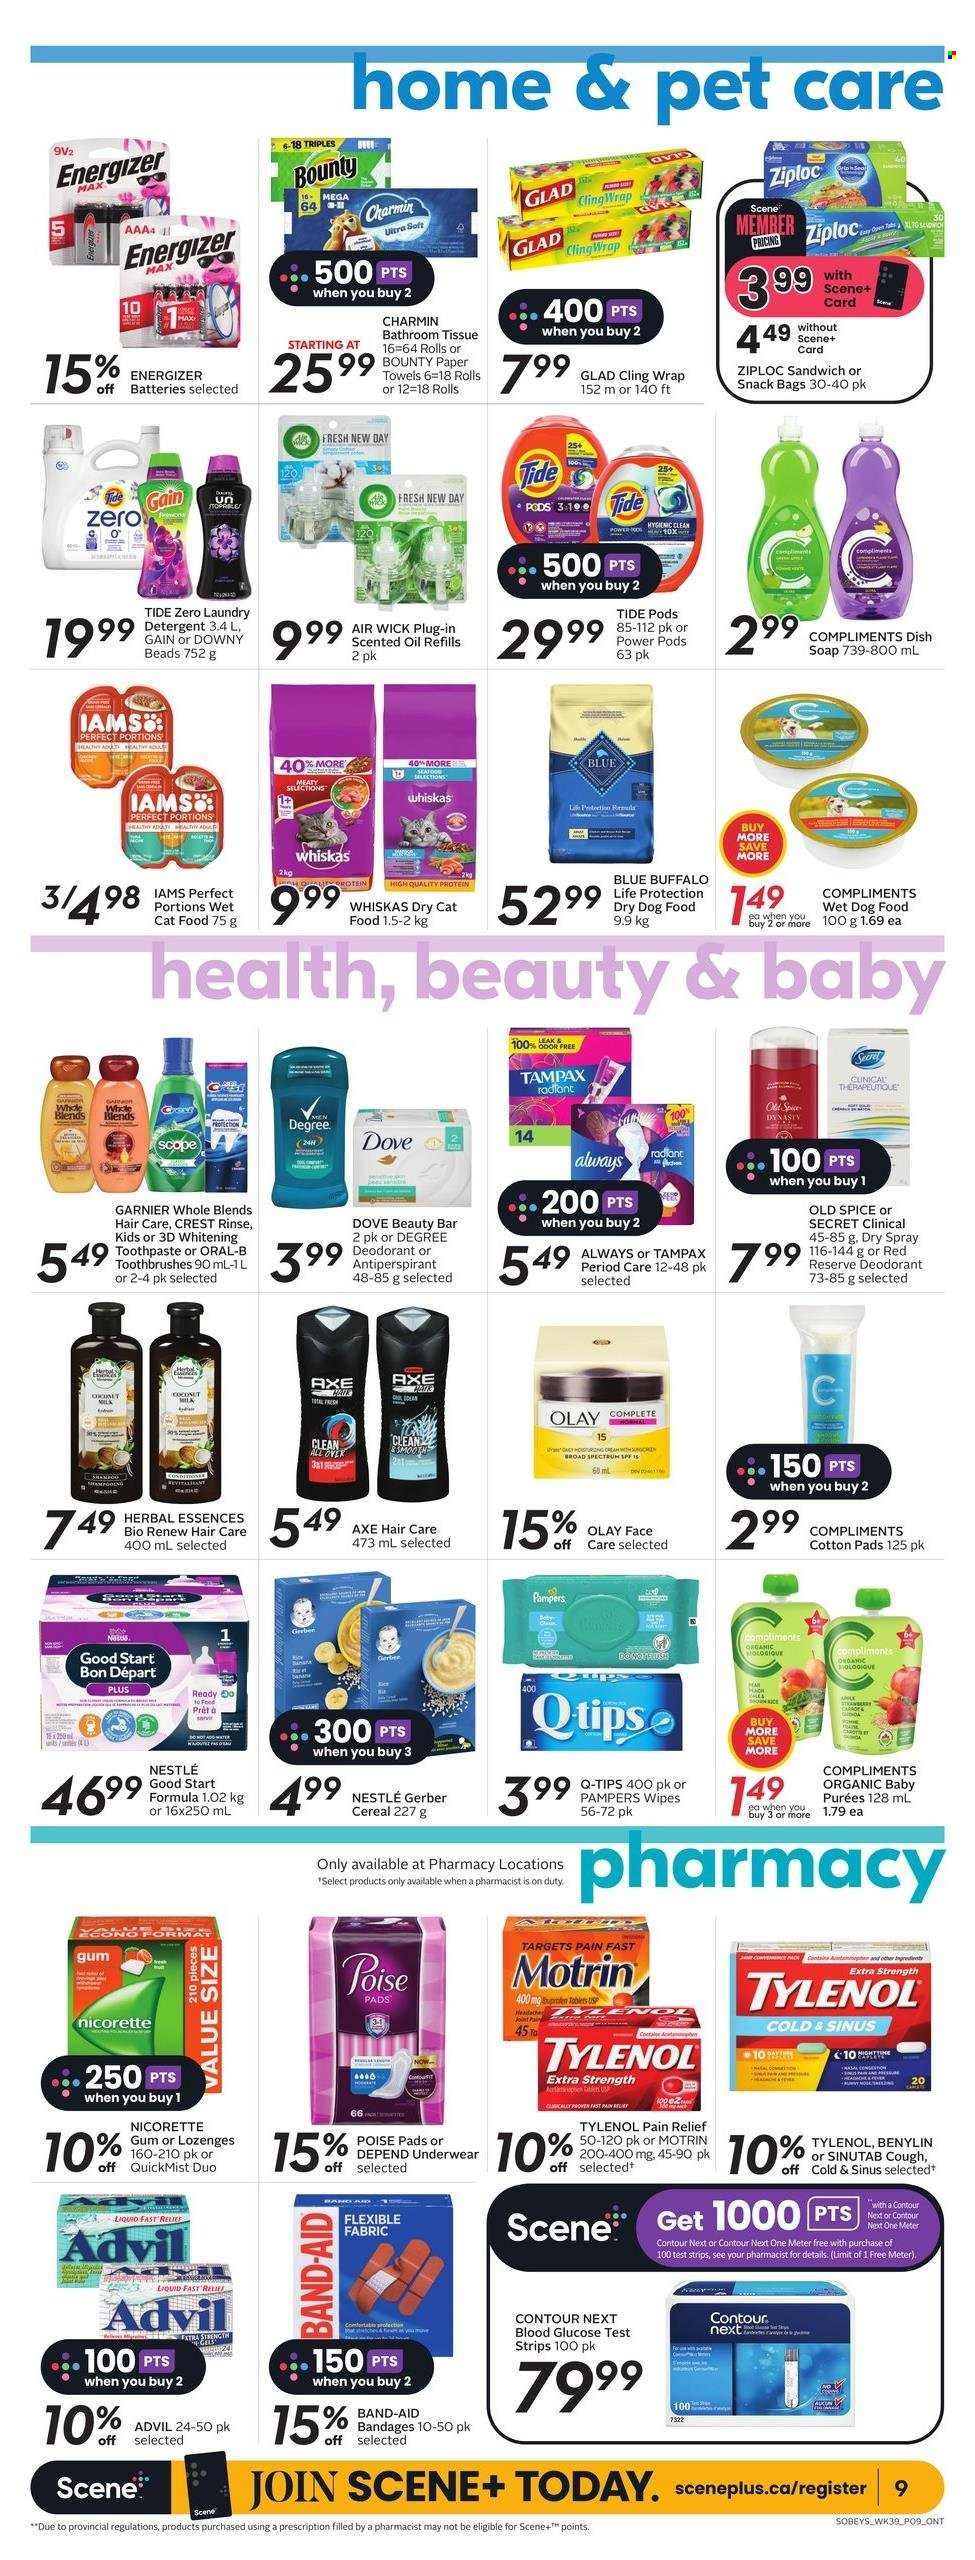 thumbnail - Sobeys Flyer - January 26, 2023 - February 01, 2023 - Sales products - sandwich, Dove, Bounty, Gerber, cereals, spice, wipes, Pampers, bath tissue, kitchen towels, paper towels, Charmin, Gain, Tide, laundry detergent, Downy Laundry, soap, toothpaste, Crest, Olay, Herbal Essences, anti-perspirant, Nike, Axe, Ziploc, contour, clingwrap, Air Wick, scented oil, animal food, dry dog food, Blue Buffalo, cat food, dog food, wet dog food, dry cat food, Iams, wet cat food, pain relief, Nicorette, Tylenol, Advil Rapid, Benylin, Motrin, band-aid, detergent, Energizer, Garnier, Nestlé, Tampax, Old Spice, Oral-B, Whiskas, deodorant. Page 12.